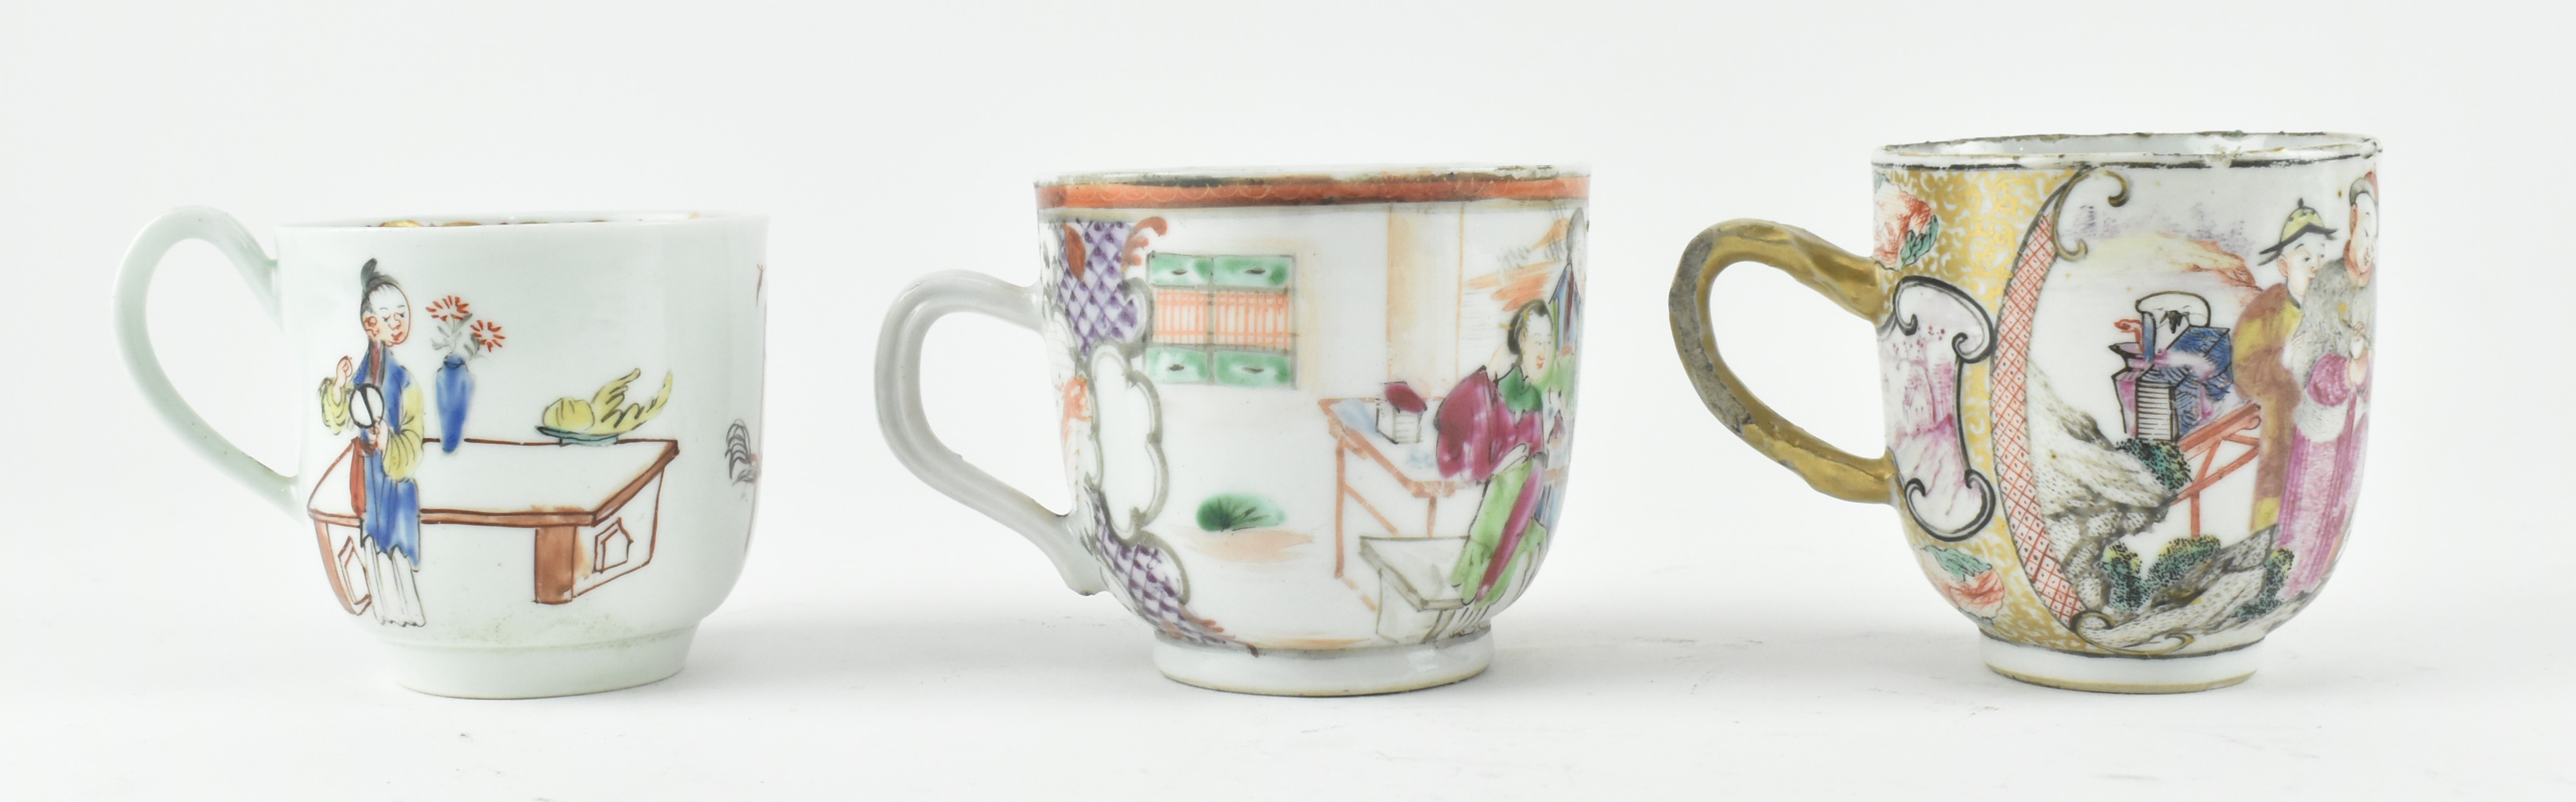 GROUP OF THREE FAMILLE ROSE FIGURINE CUPS 清及以后 粉彩人物杯 - Image 2 of 5